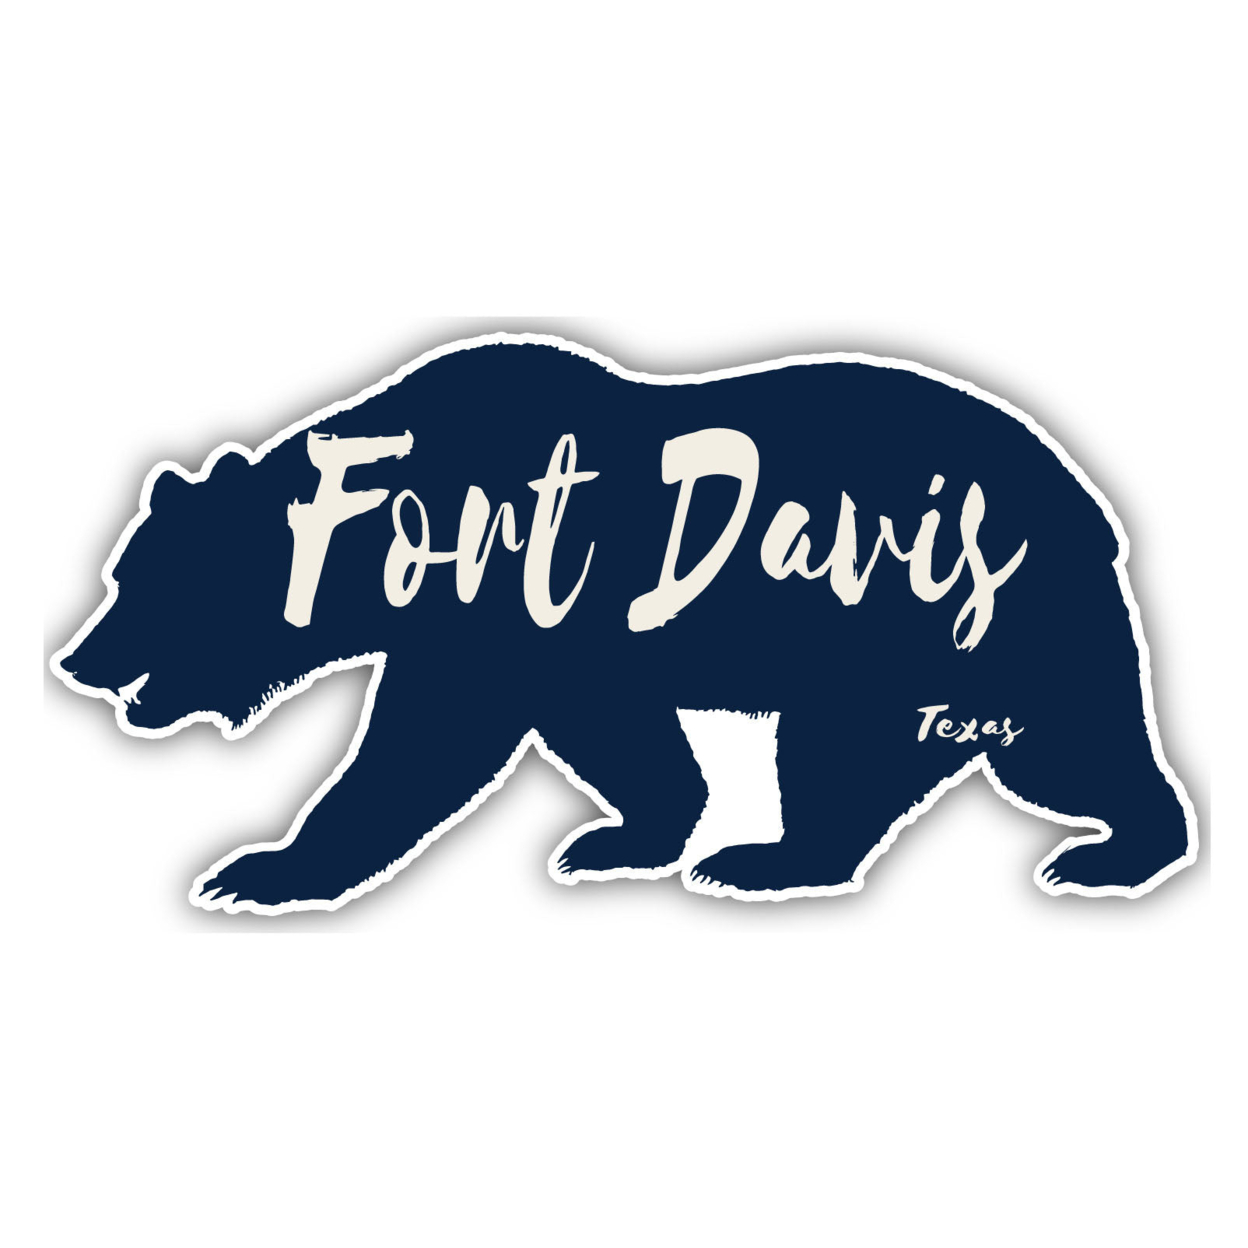 Fort Davis Texas Souvenir Decorative Stickers (Choose Theme And Size) - 4-Pack, 2-Inch, Bear